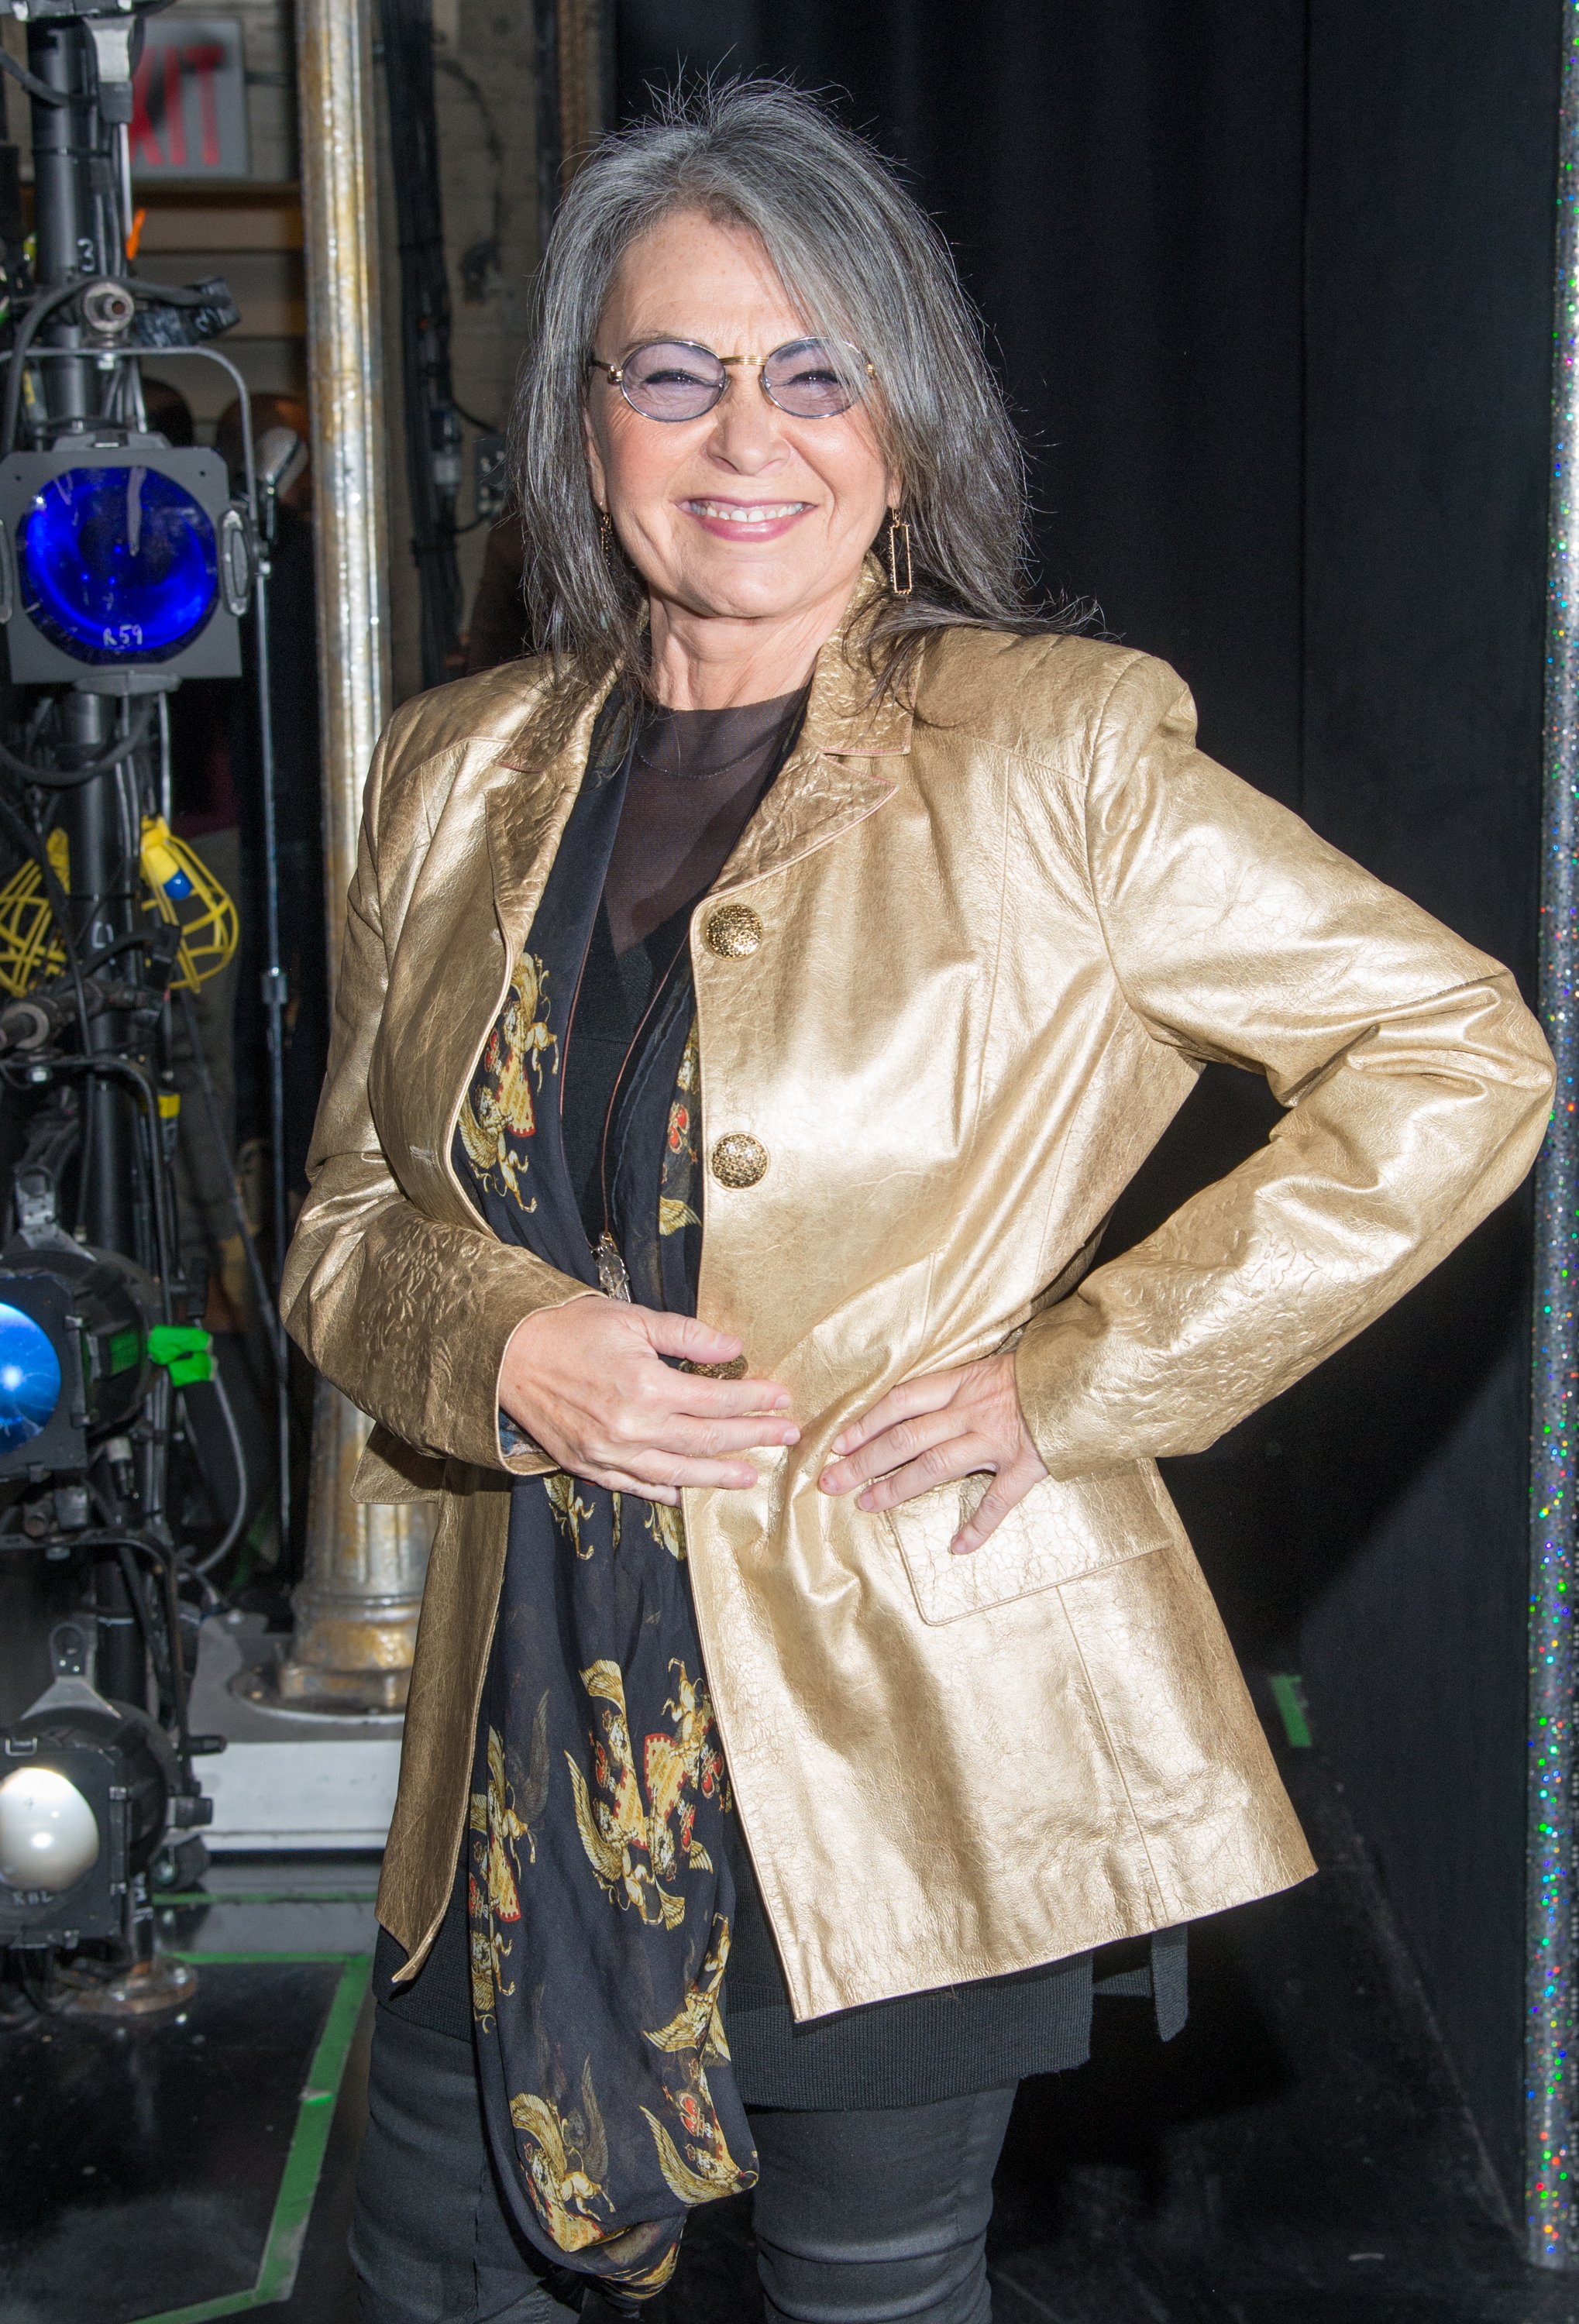 Actress Roseanne Barr attends Broadway's "After Midnight" at The Brooks Atkinson Theatre on April 1, 2014 in New York City. | Source: Getty Images